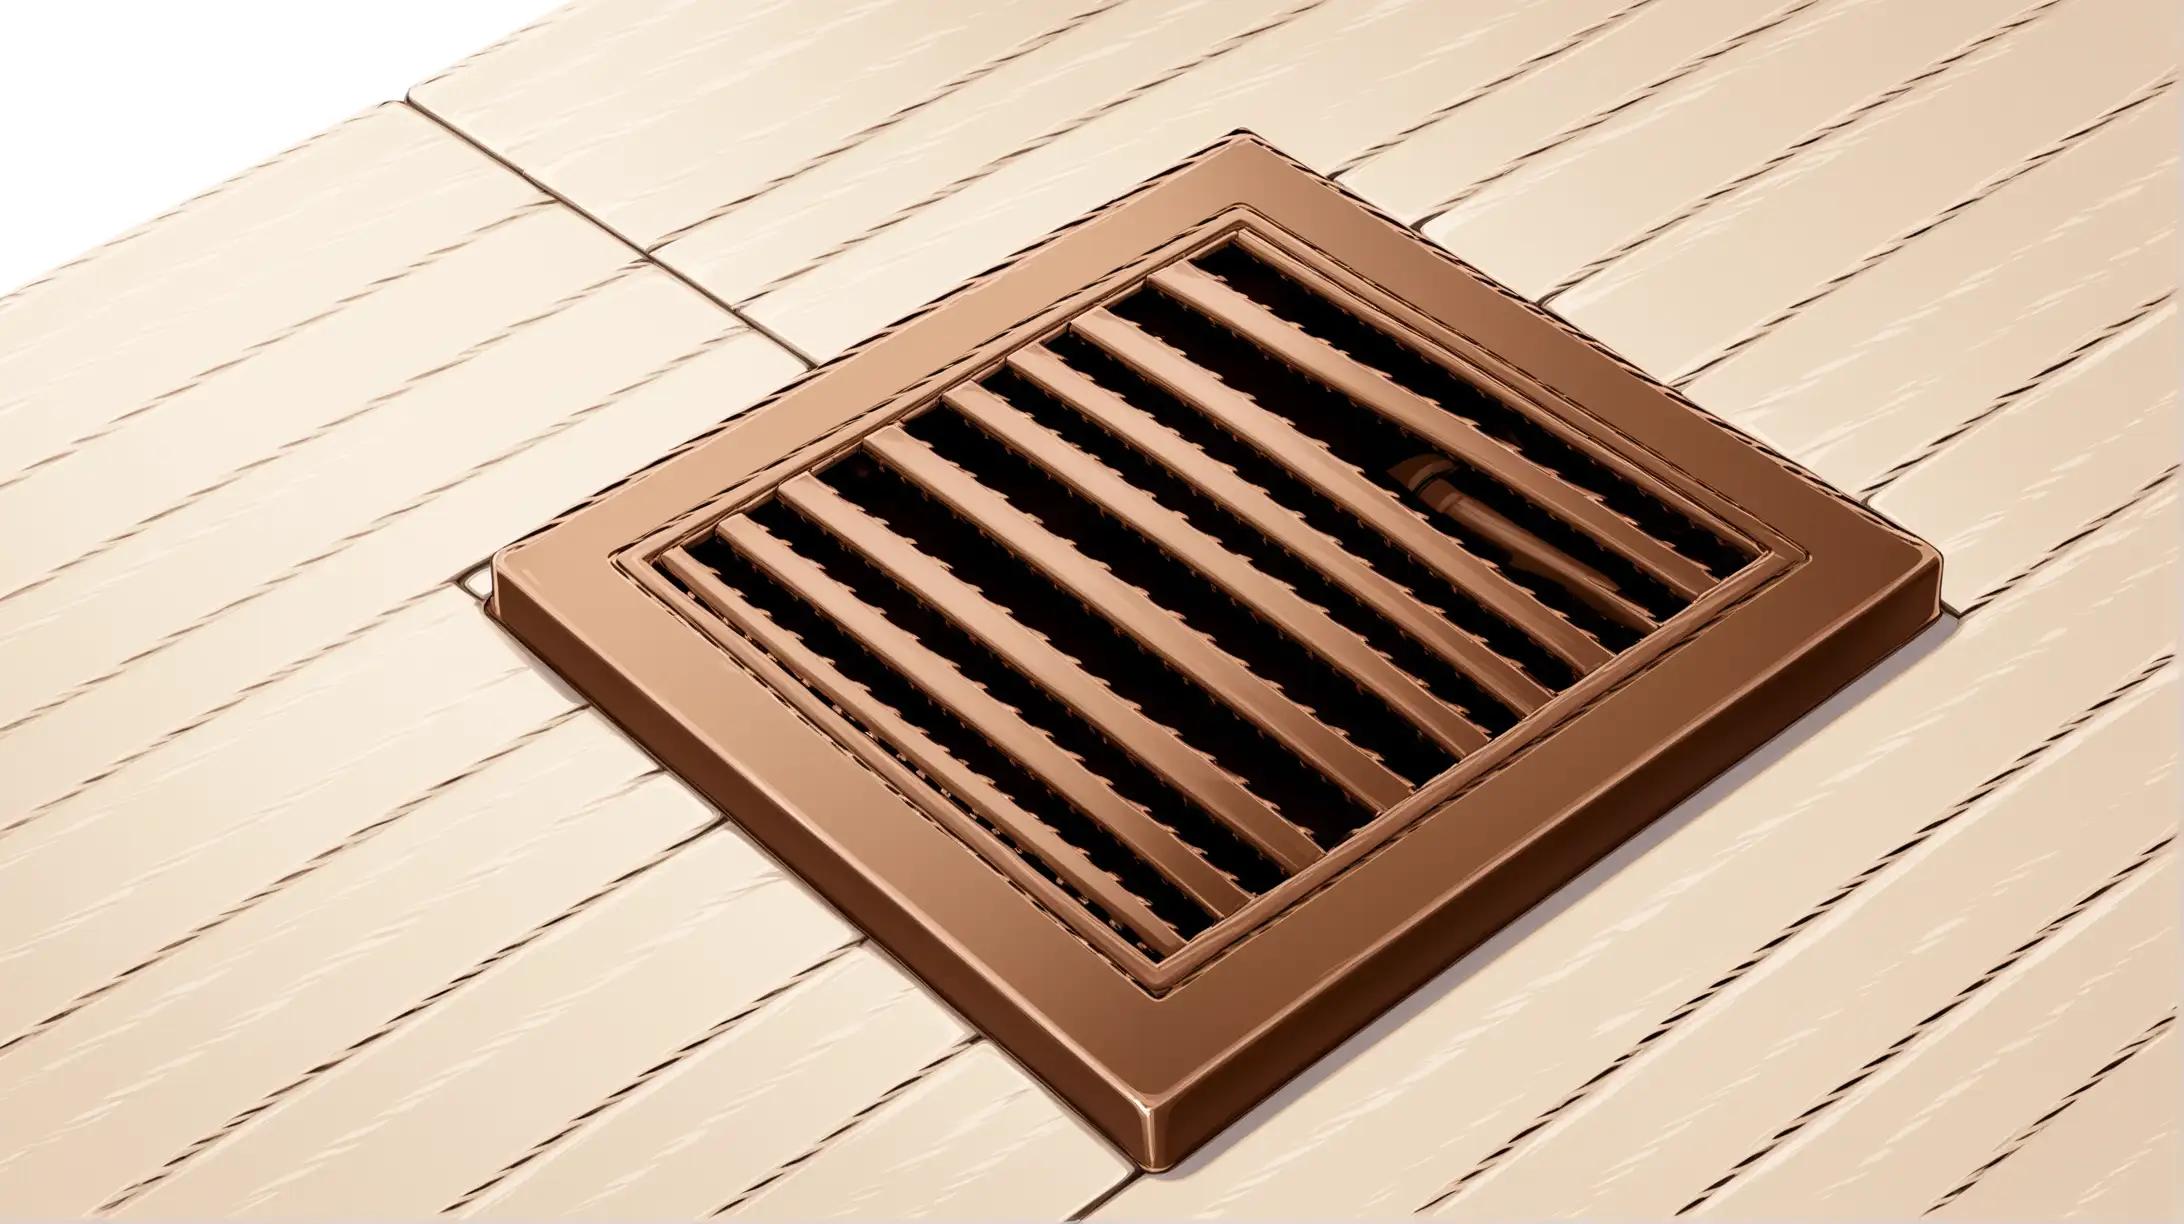 Illustration of a rectangular brown floor vent on a white background. Close up